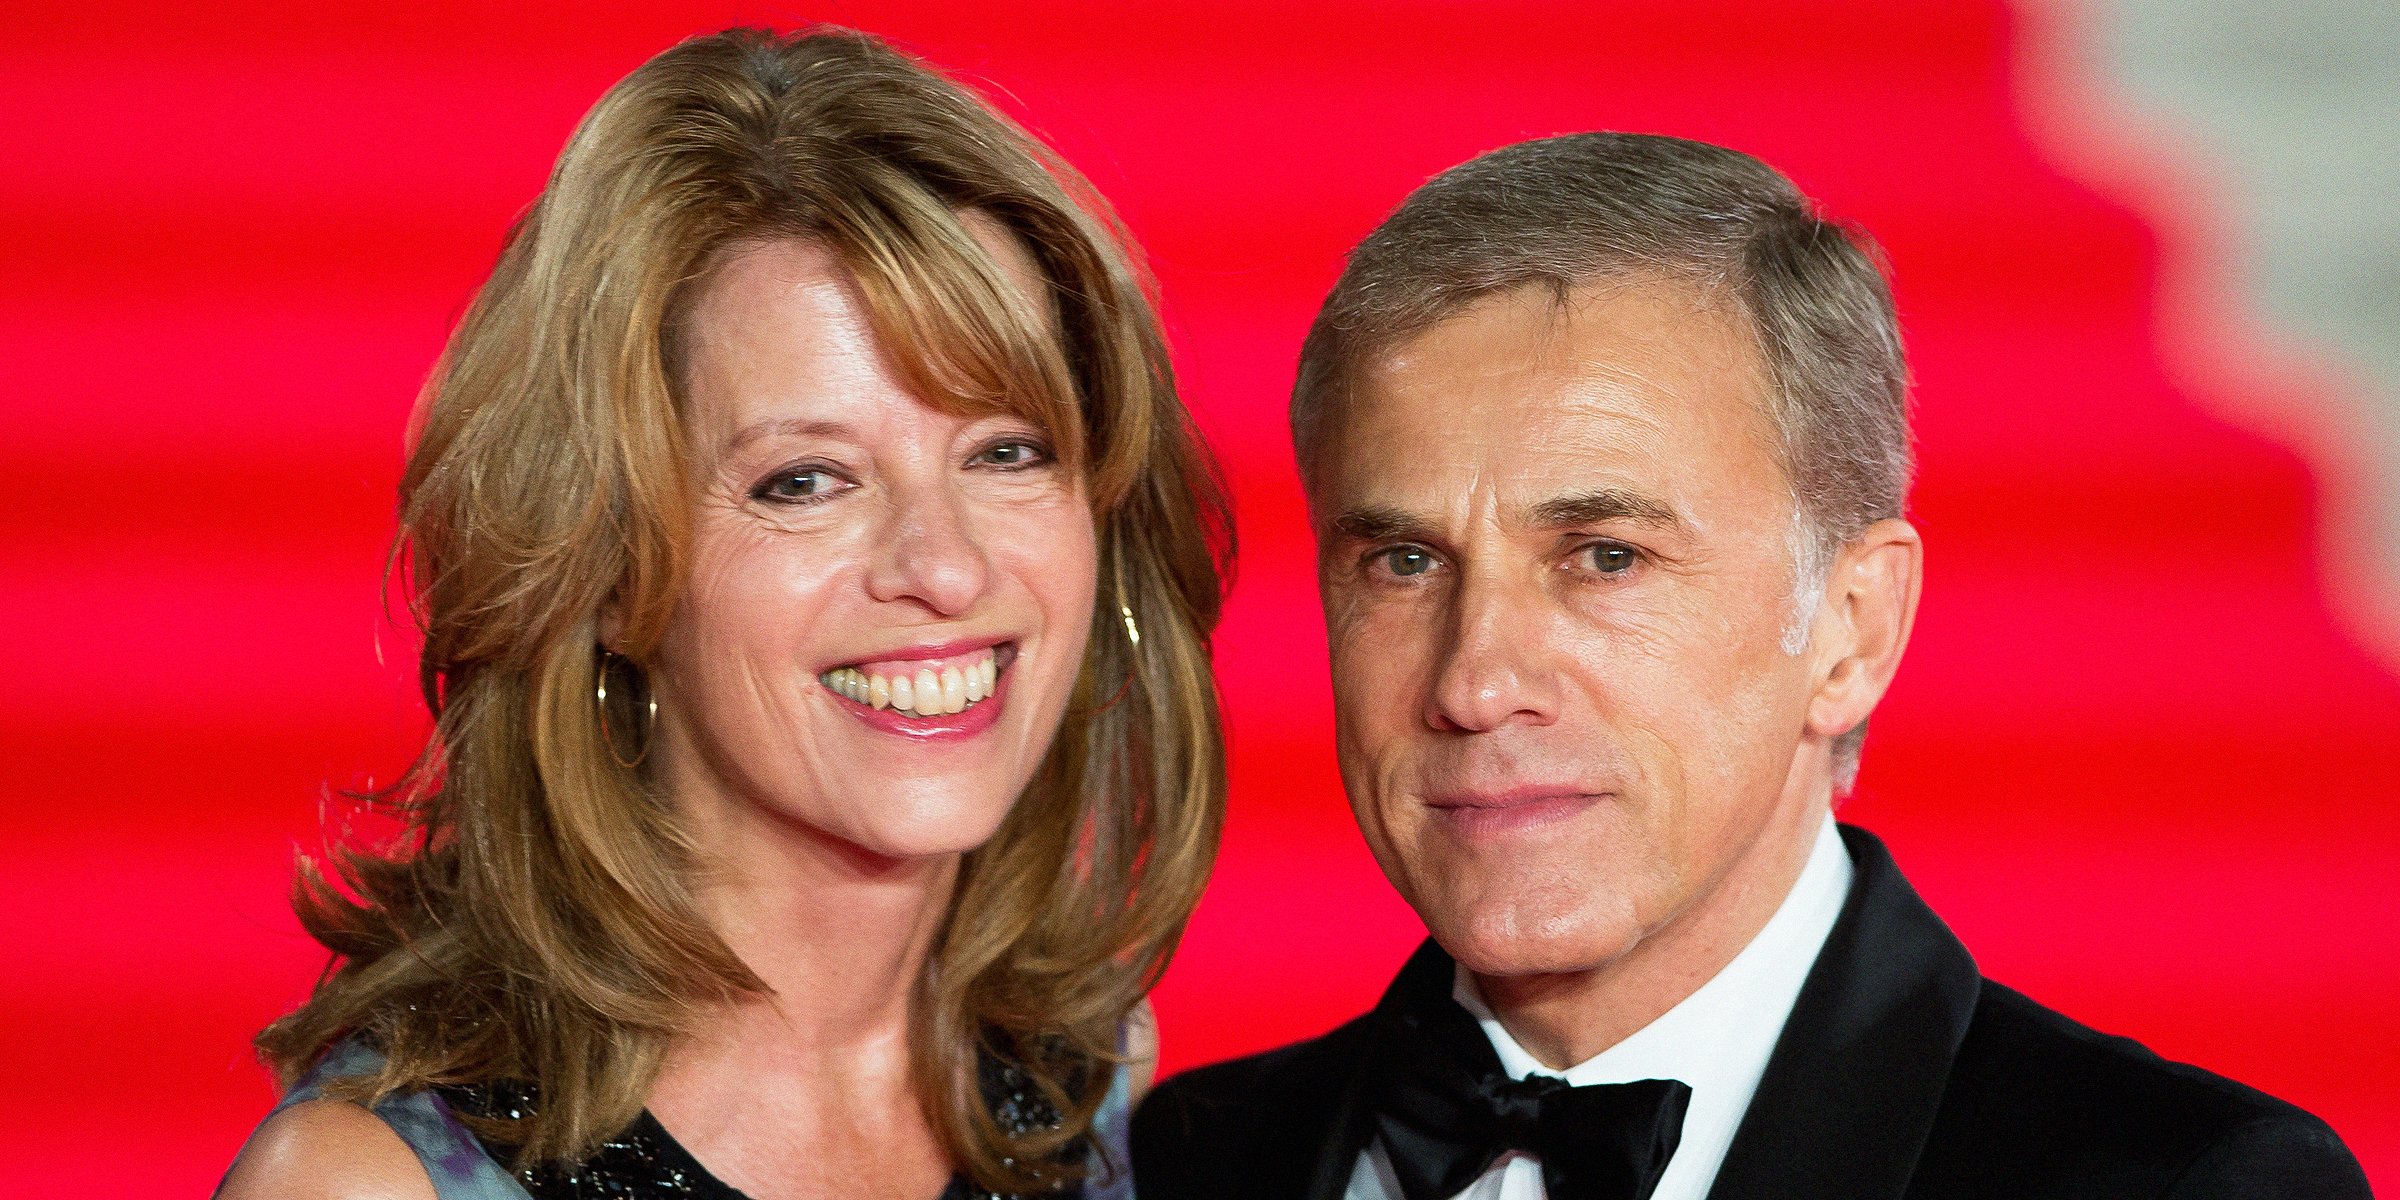 Judith Holste and Christoph Waltz  | Source: Getty Images